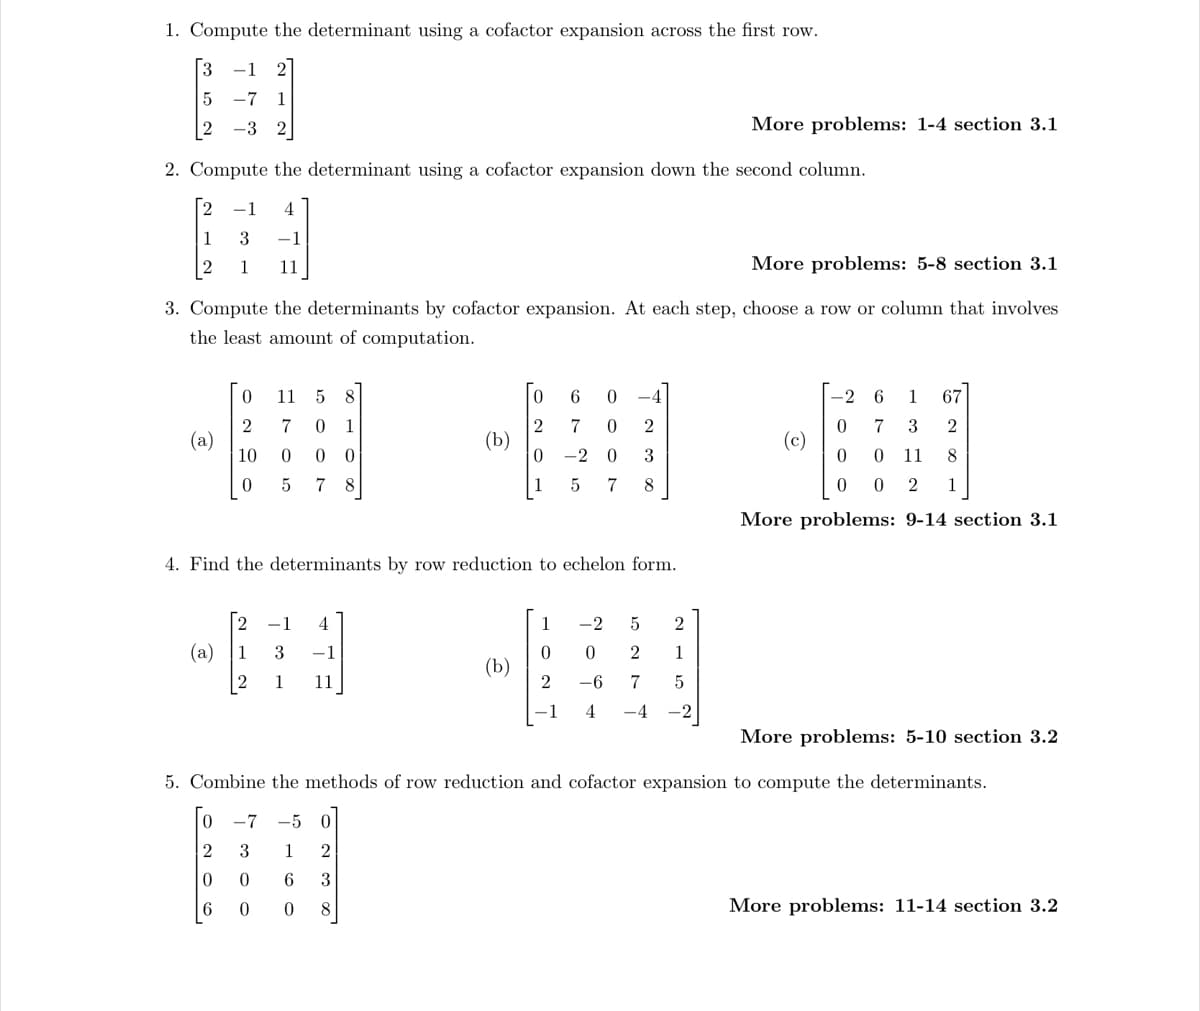 1. Compute the determinant using a cofactor expansion across the first row.
-1 2
-7 1
-3 2
3
5
2
2. Compute the determinant using a cofactor expansion down the second column.
2 -1
1
2
(a)
3 -1
1 11
More problems: 5-8 section 3.1
3. Compute the determinants by cofactor expansion. At each step, choose a row or column that involves
the least amount of computation.
(a)
0
2
10
0
11 5 8
0 1
0 0
5 78
170
4. Find the determinants by row reduction to echelon form.
2 -1 4
1 3 -1
2 1 11
O co
0
0
∞ W NO
2
3
0 6 0
2
0
(b)
8
7 0 2
0 3
-2
5 7 8
More problems: 5-10 section 3.2
5. Combine the methods of row reduction and cofactor expansion to compute the determinants.
0 -7 -5
2
3
1
0
6
6
0
More problems: 1-4 section 3.1
1
-2
0 0 2
2
-6 7
1 4 -4
5 2
1
5
-2 6
67
0 7 3
2
0
0 11
8
0
0 2 1
More problems: 9-14 section 3.1
(c)
More problems: 11-14 section 3.2